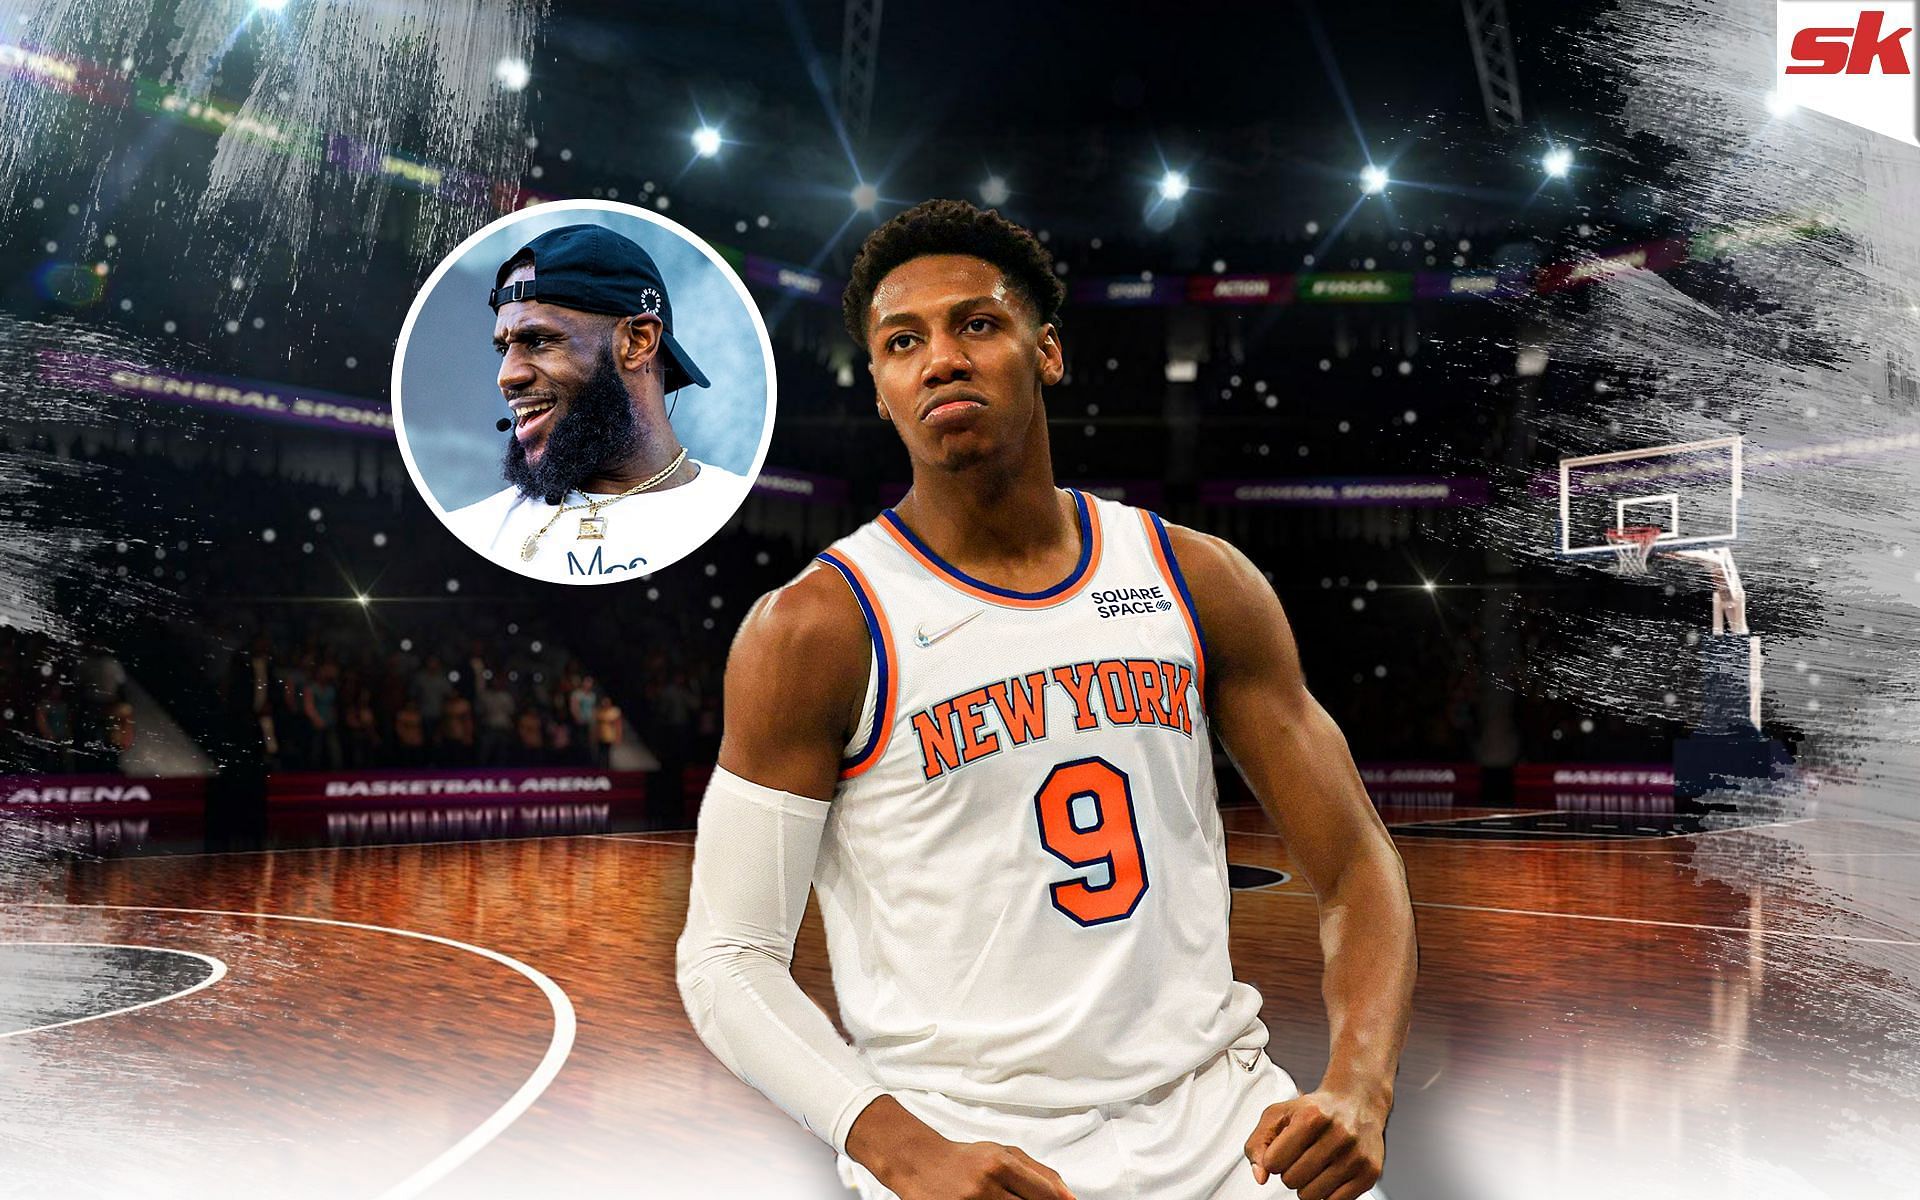 LeBron James shared a story about teaming up with RJ Barrett